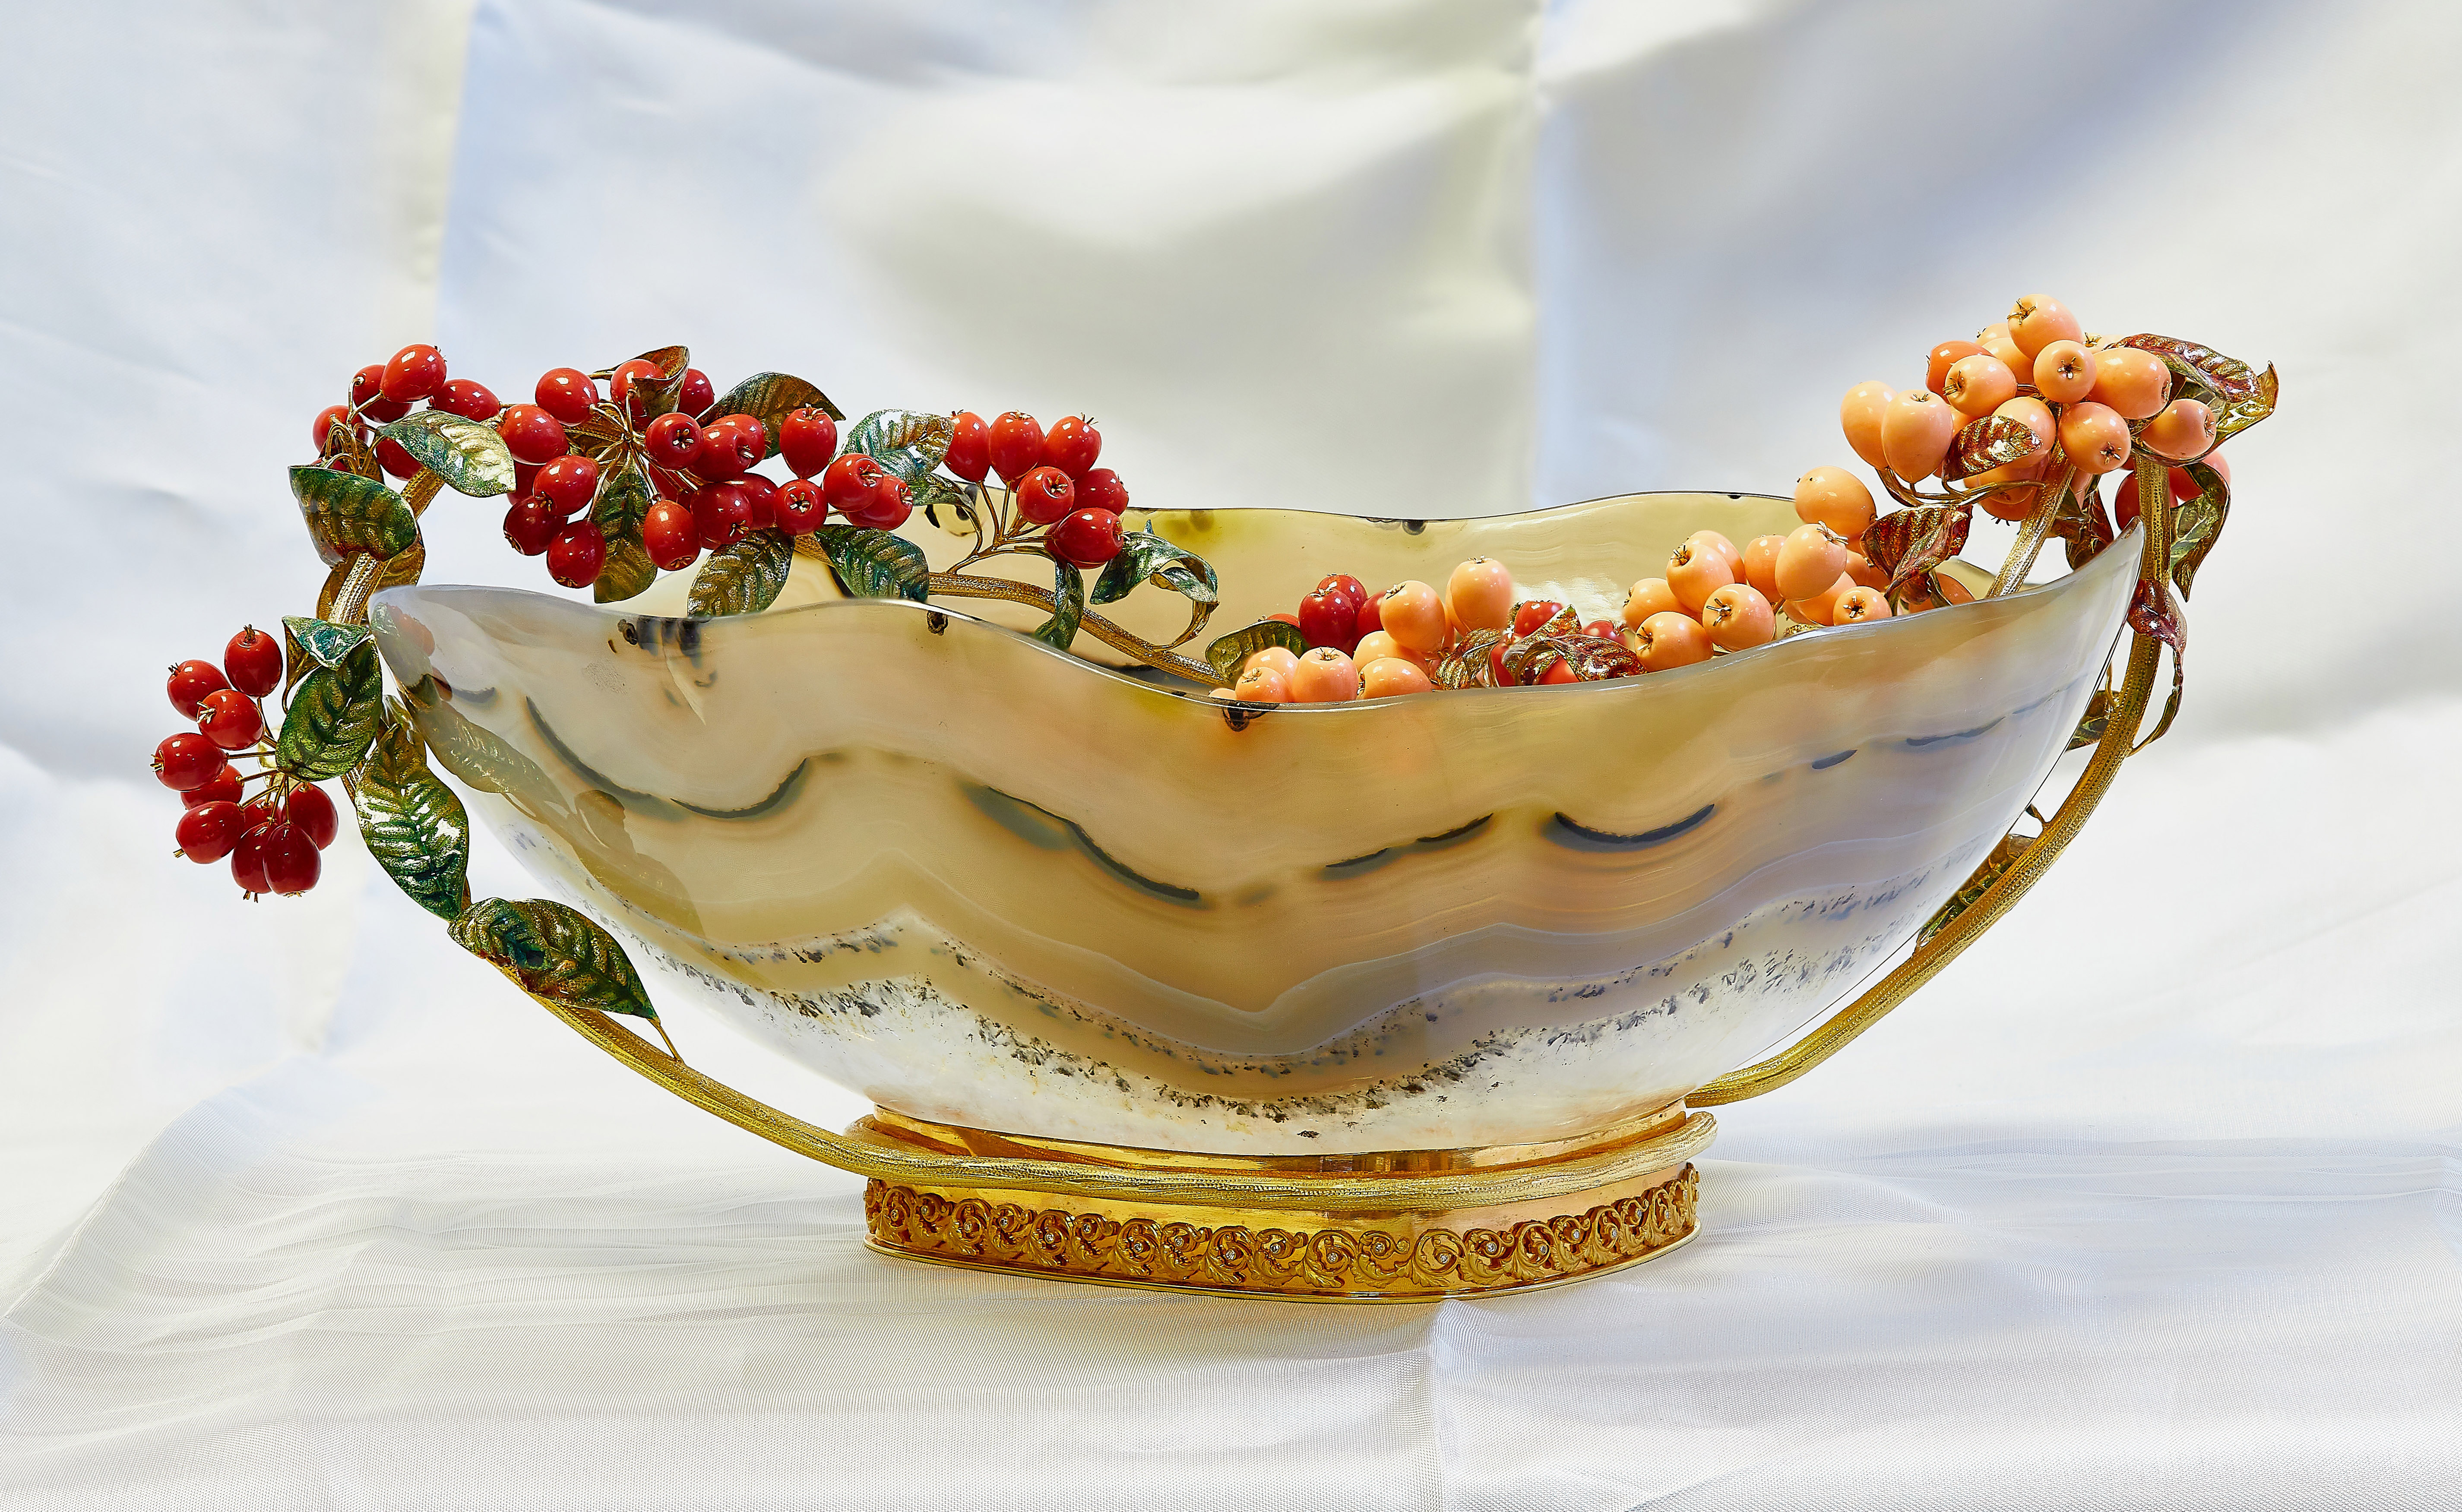 R. GRASSI MILANO, IMPORTANT 18-ct GOLD, AGATE, ENAMEL AND CORAL BOWL.